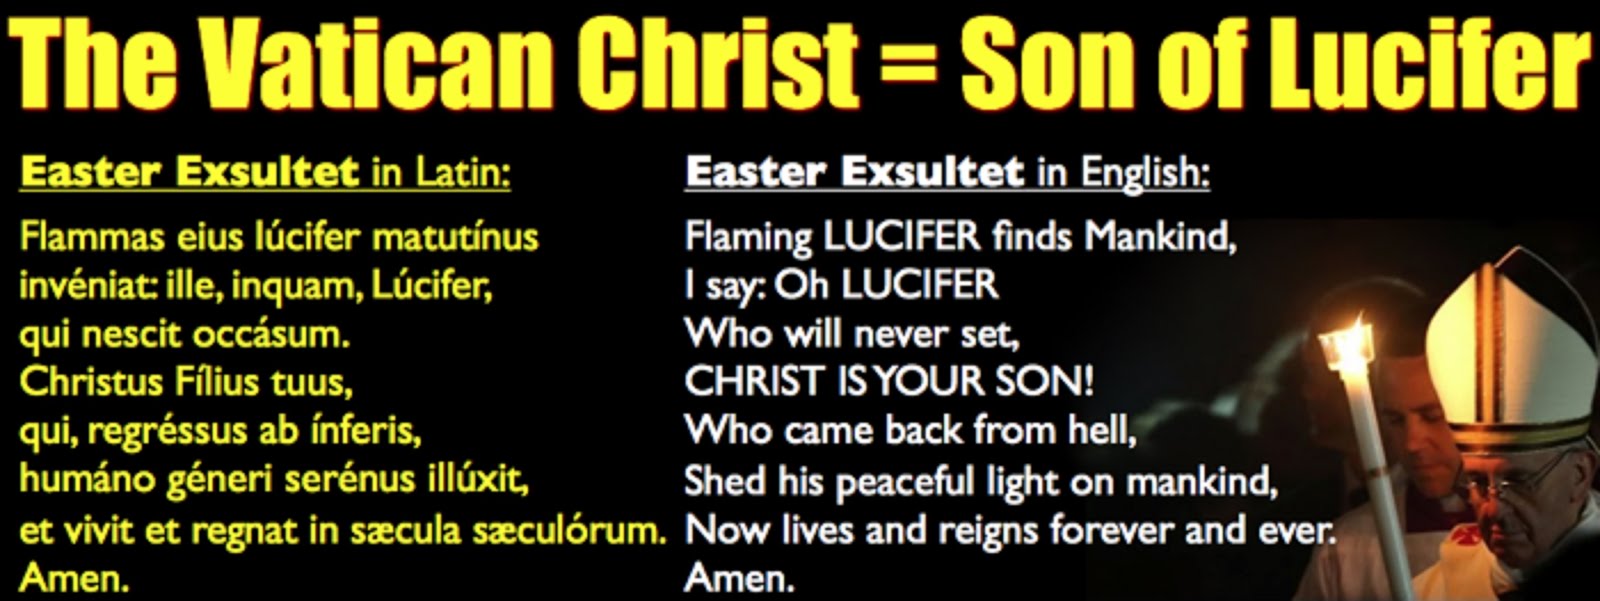 THE VATICAN CHRIST = SON OF LUCIFER